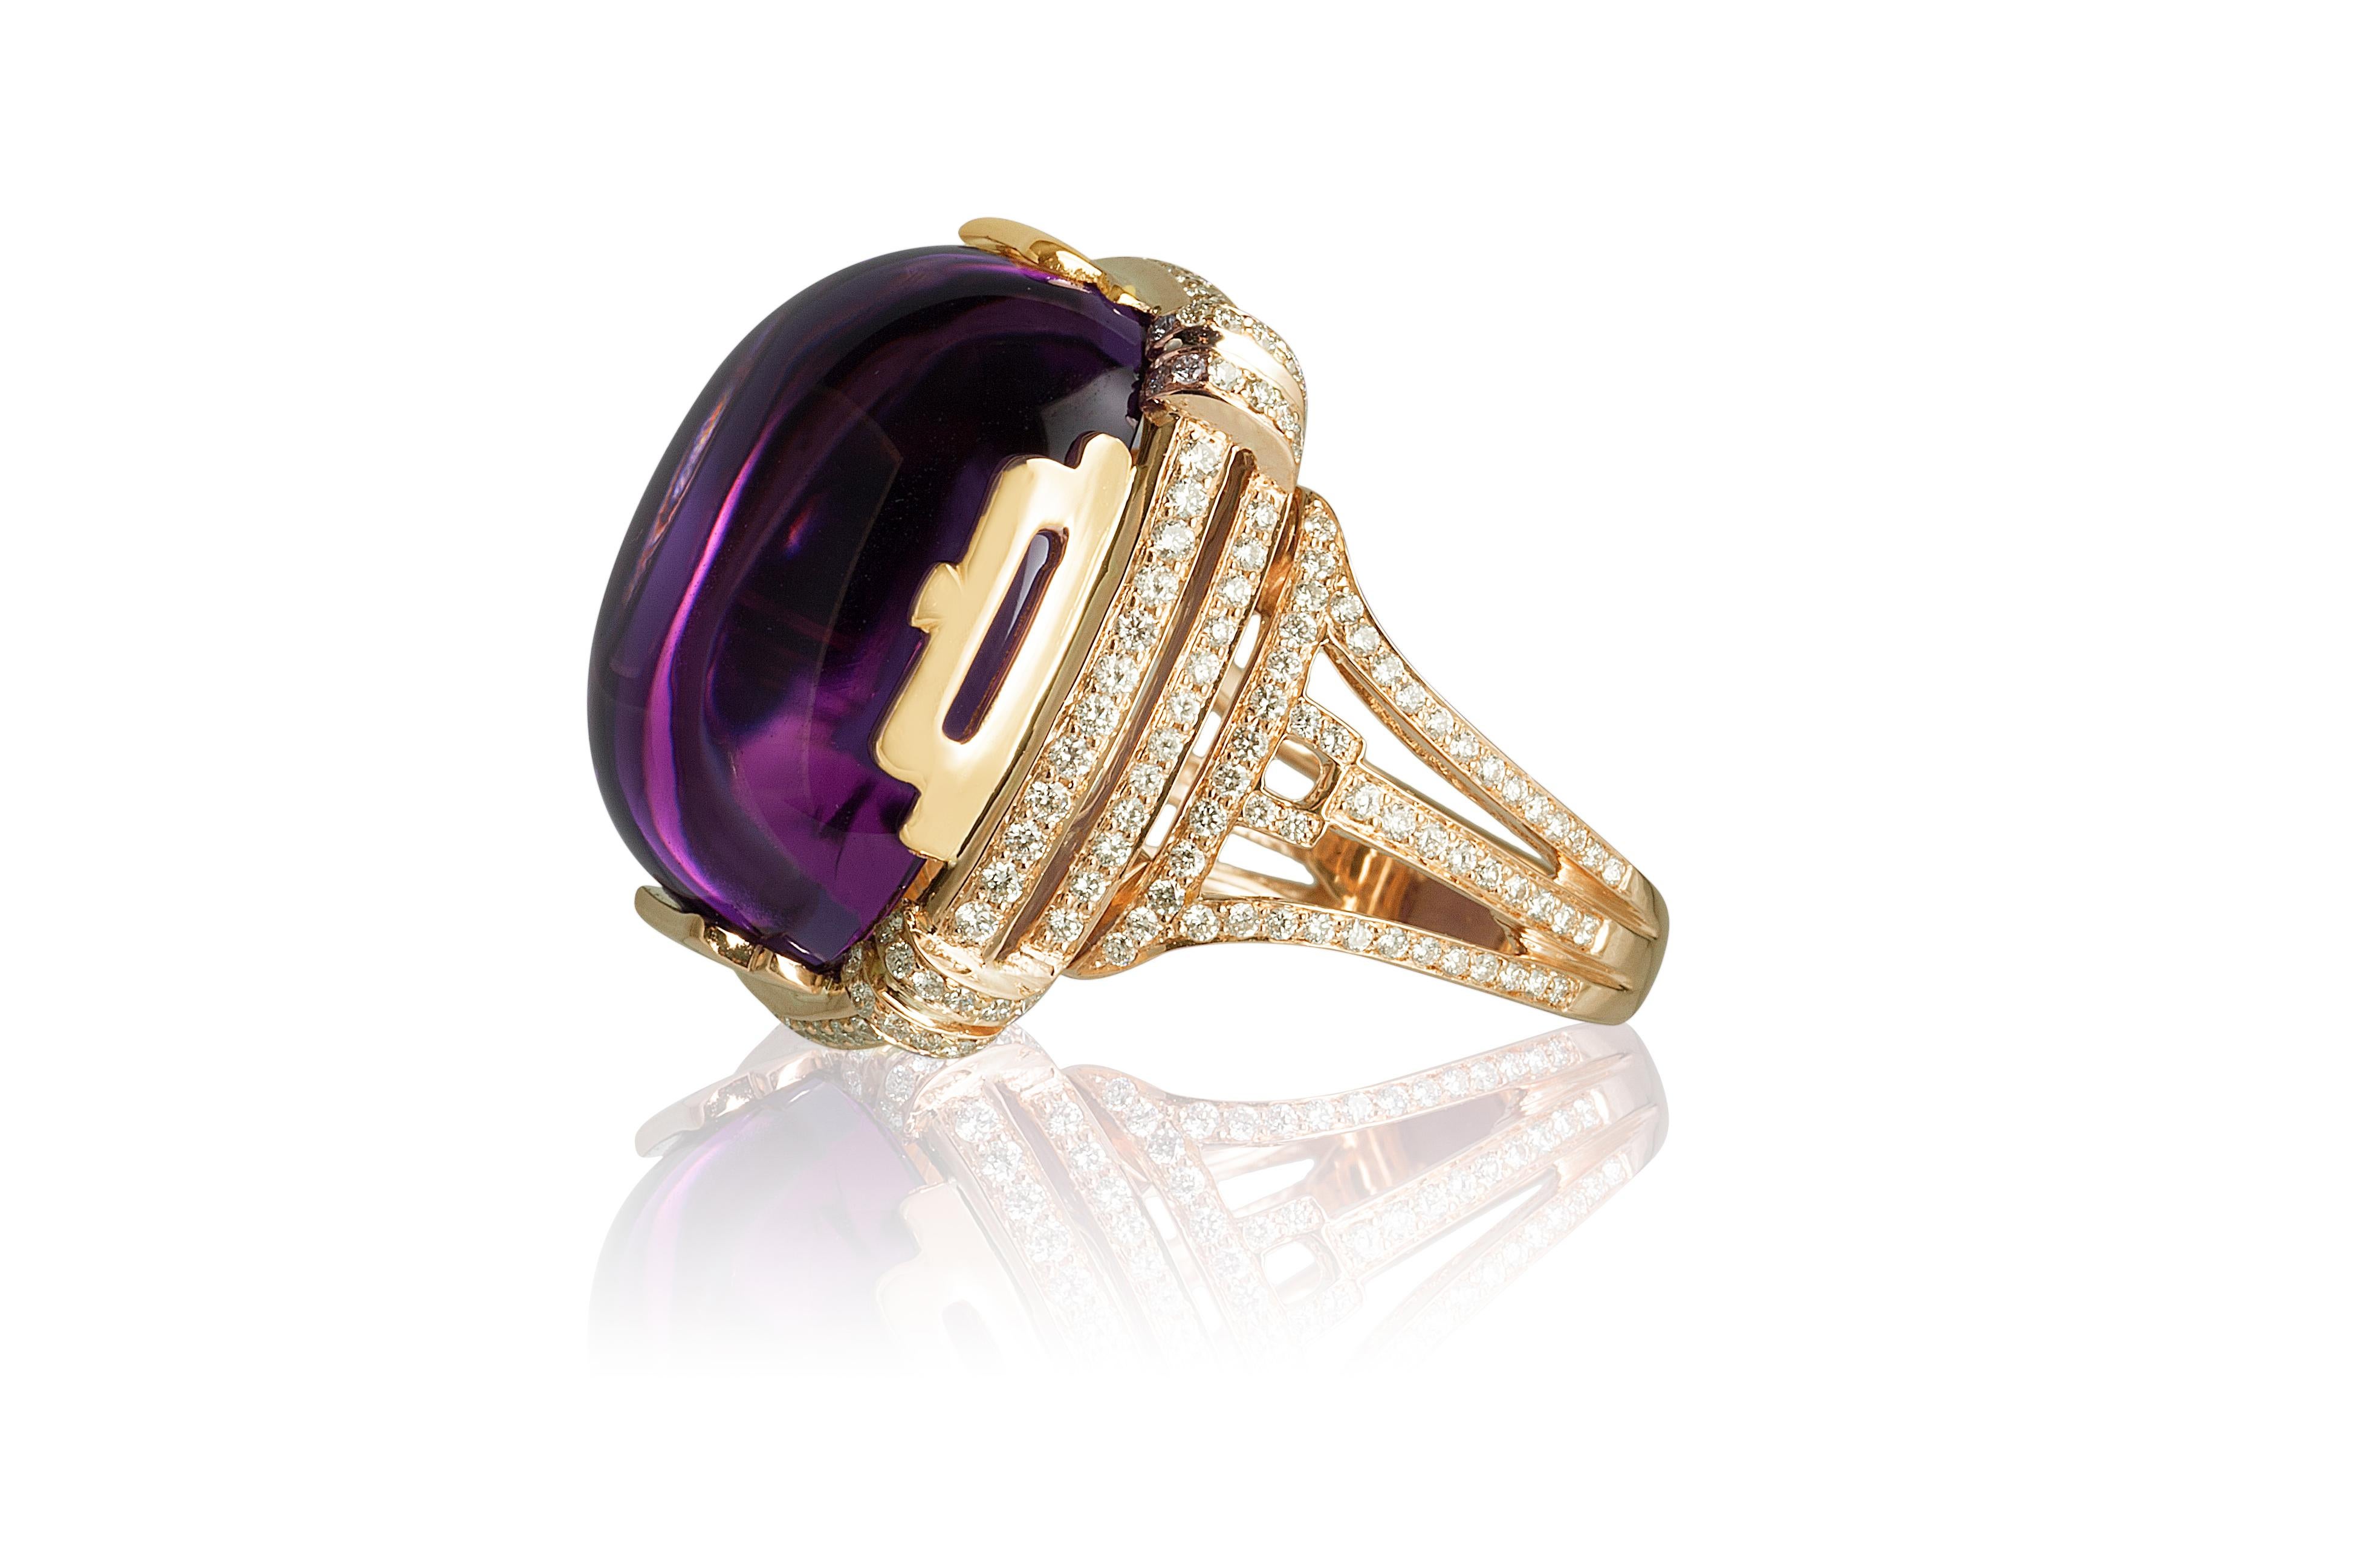 Amethyst Large Cushion Cabochon Ring with Diamonds in 18K Yellow Gold, from 'Rock 'N Roll' Collection

Stone Size: 21.50 x 19.50 mm

Gemstone Approx. Wt: Amethyst- 32.25 Carats

Diamonds: G-H / VS, Approx. Wt: 1.00 Carats